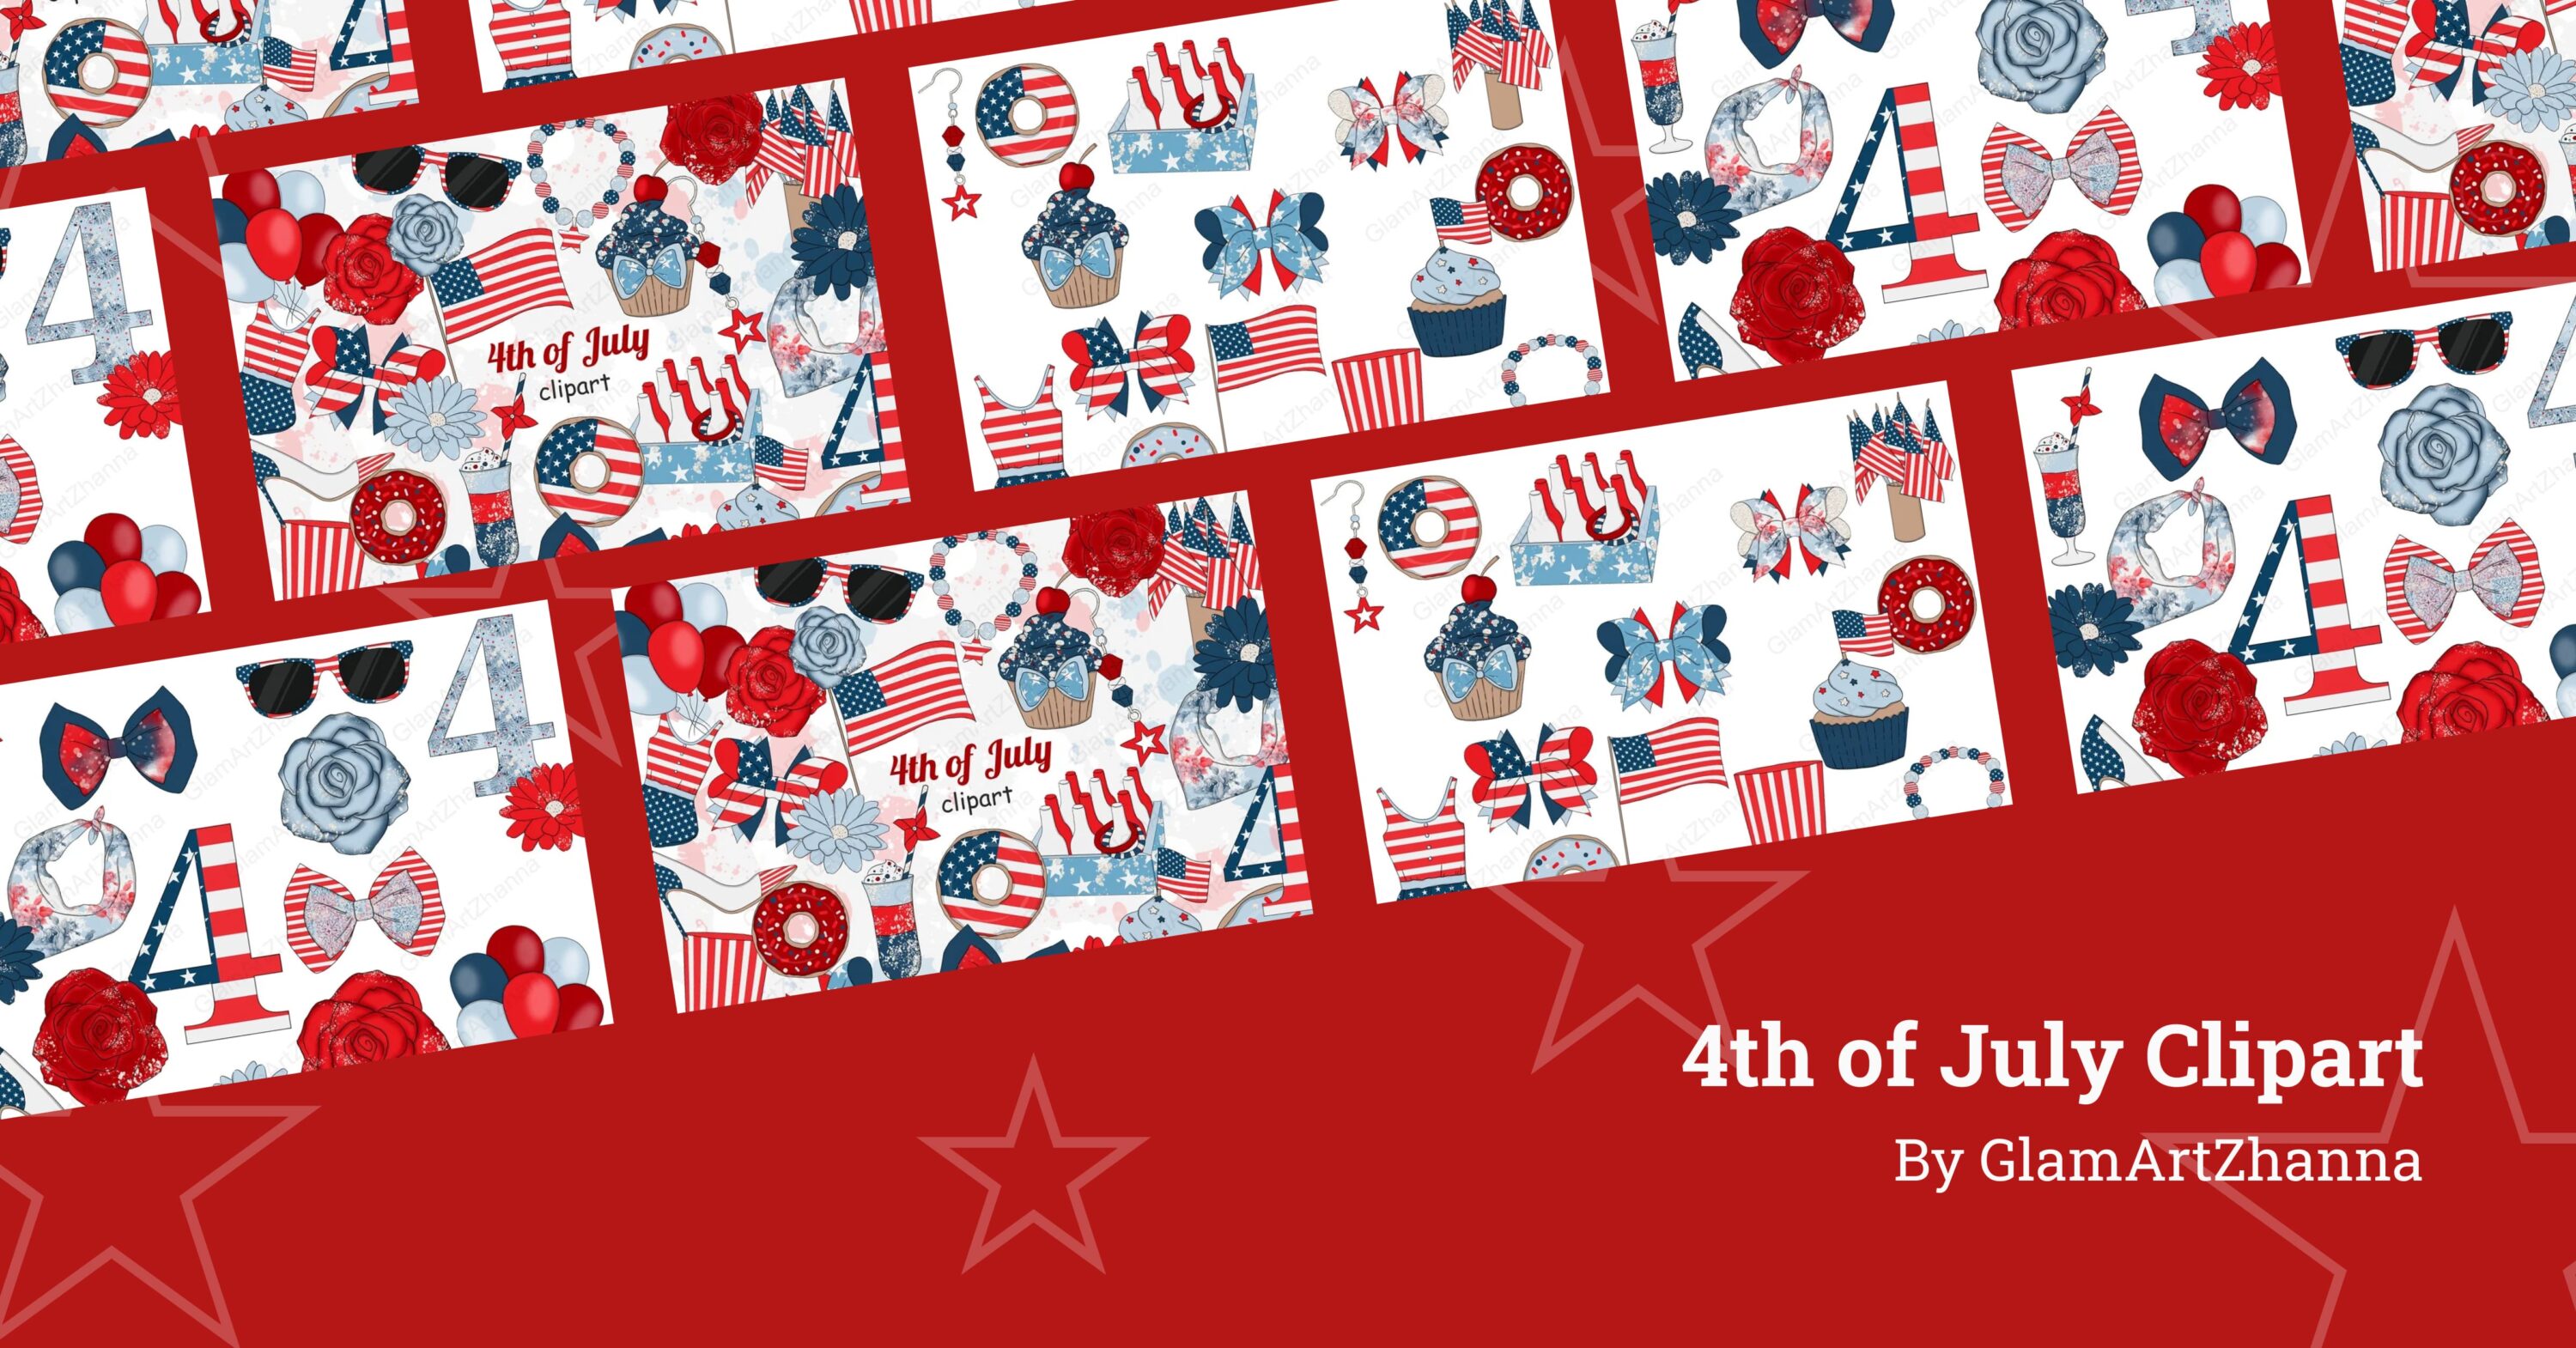 4th of July Clipart facebook image.